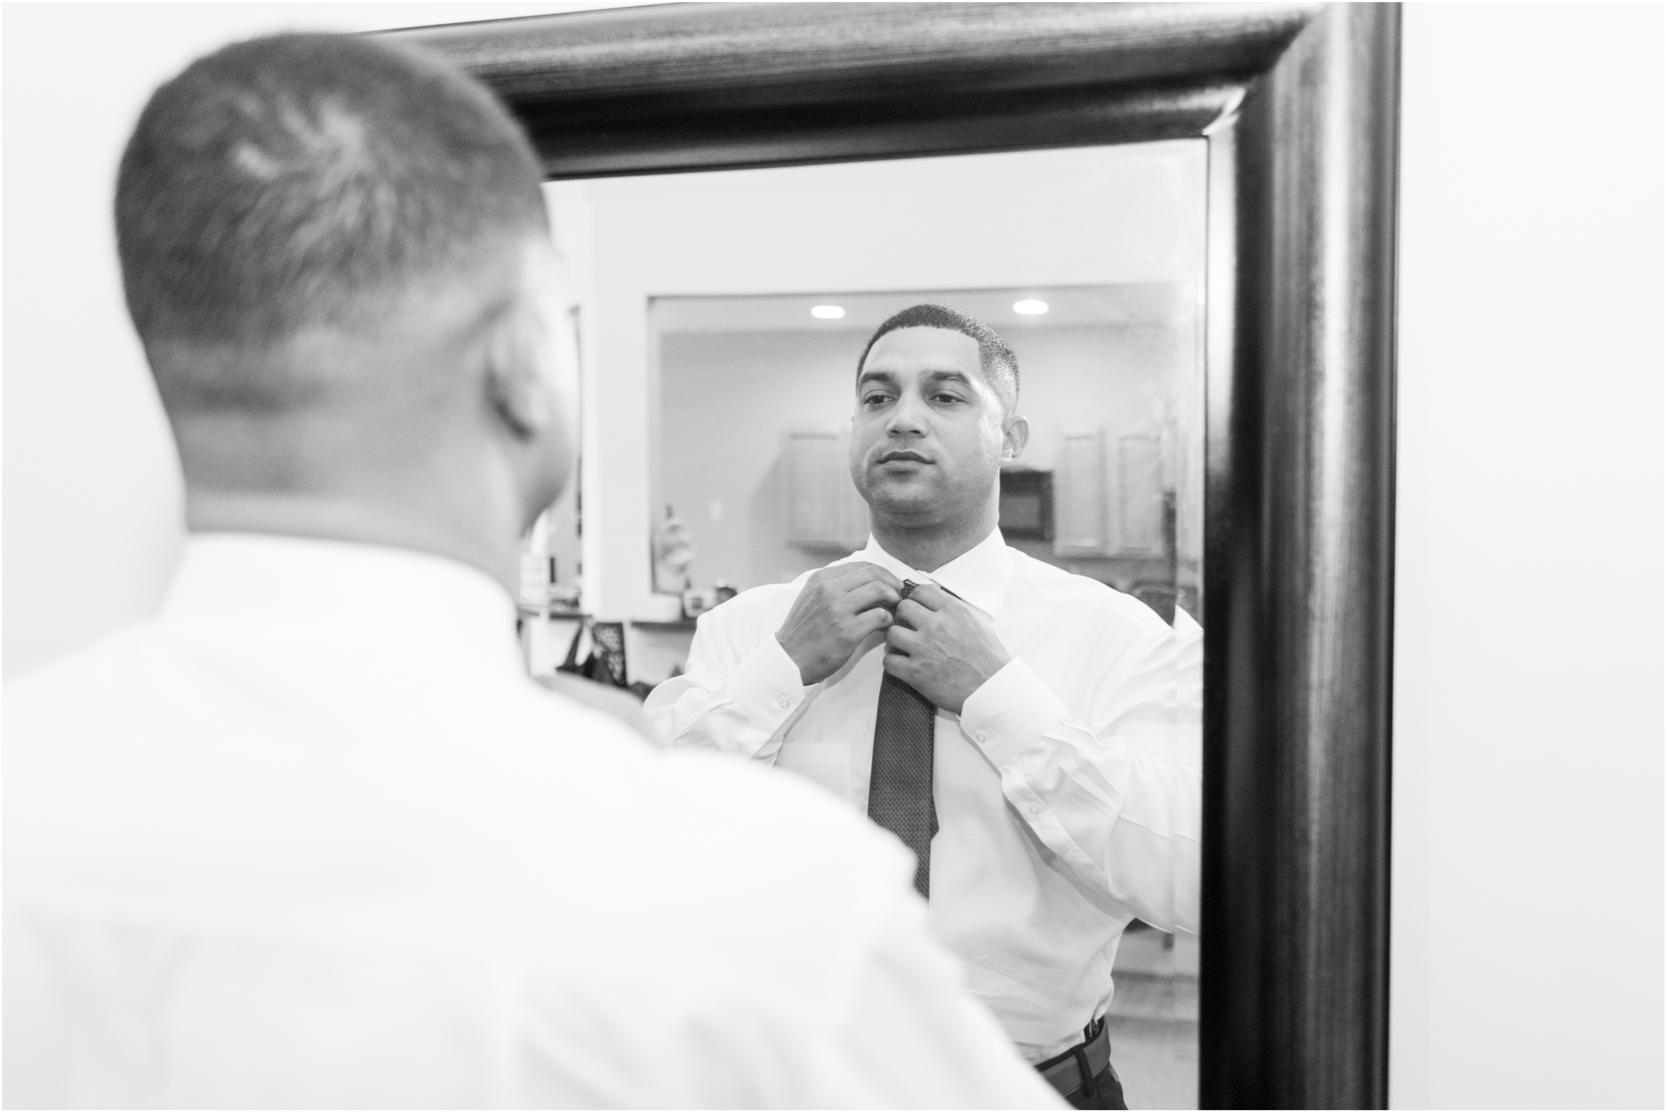 Olmsted Groom Getting Ready Wedding Uniquely His Photography